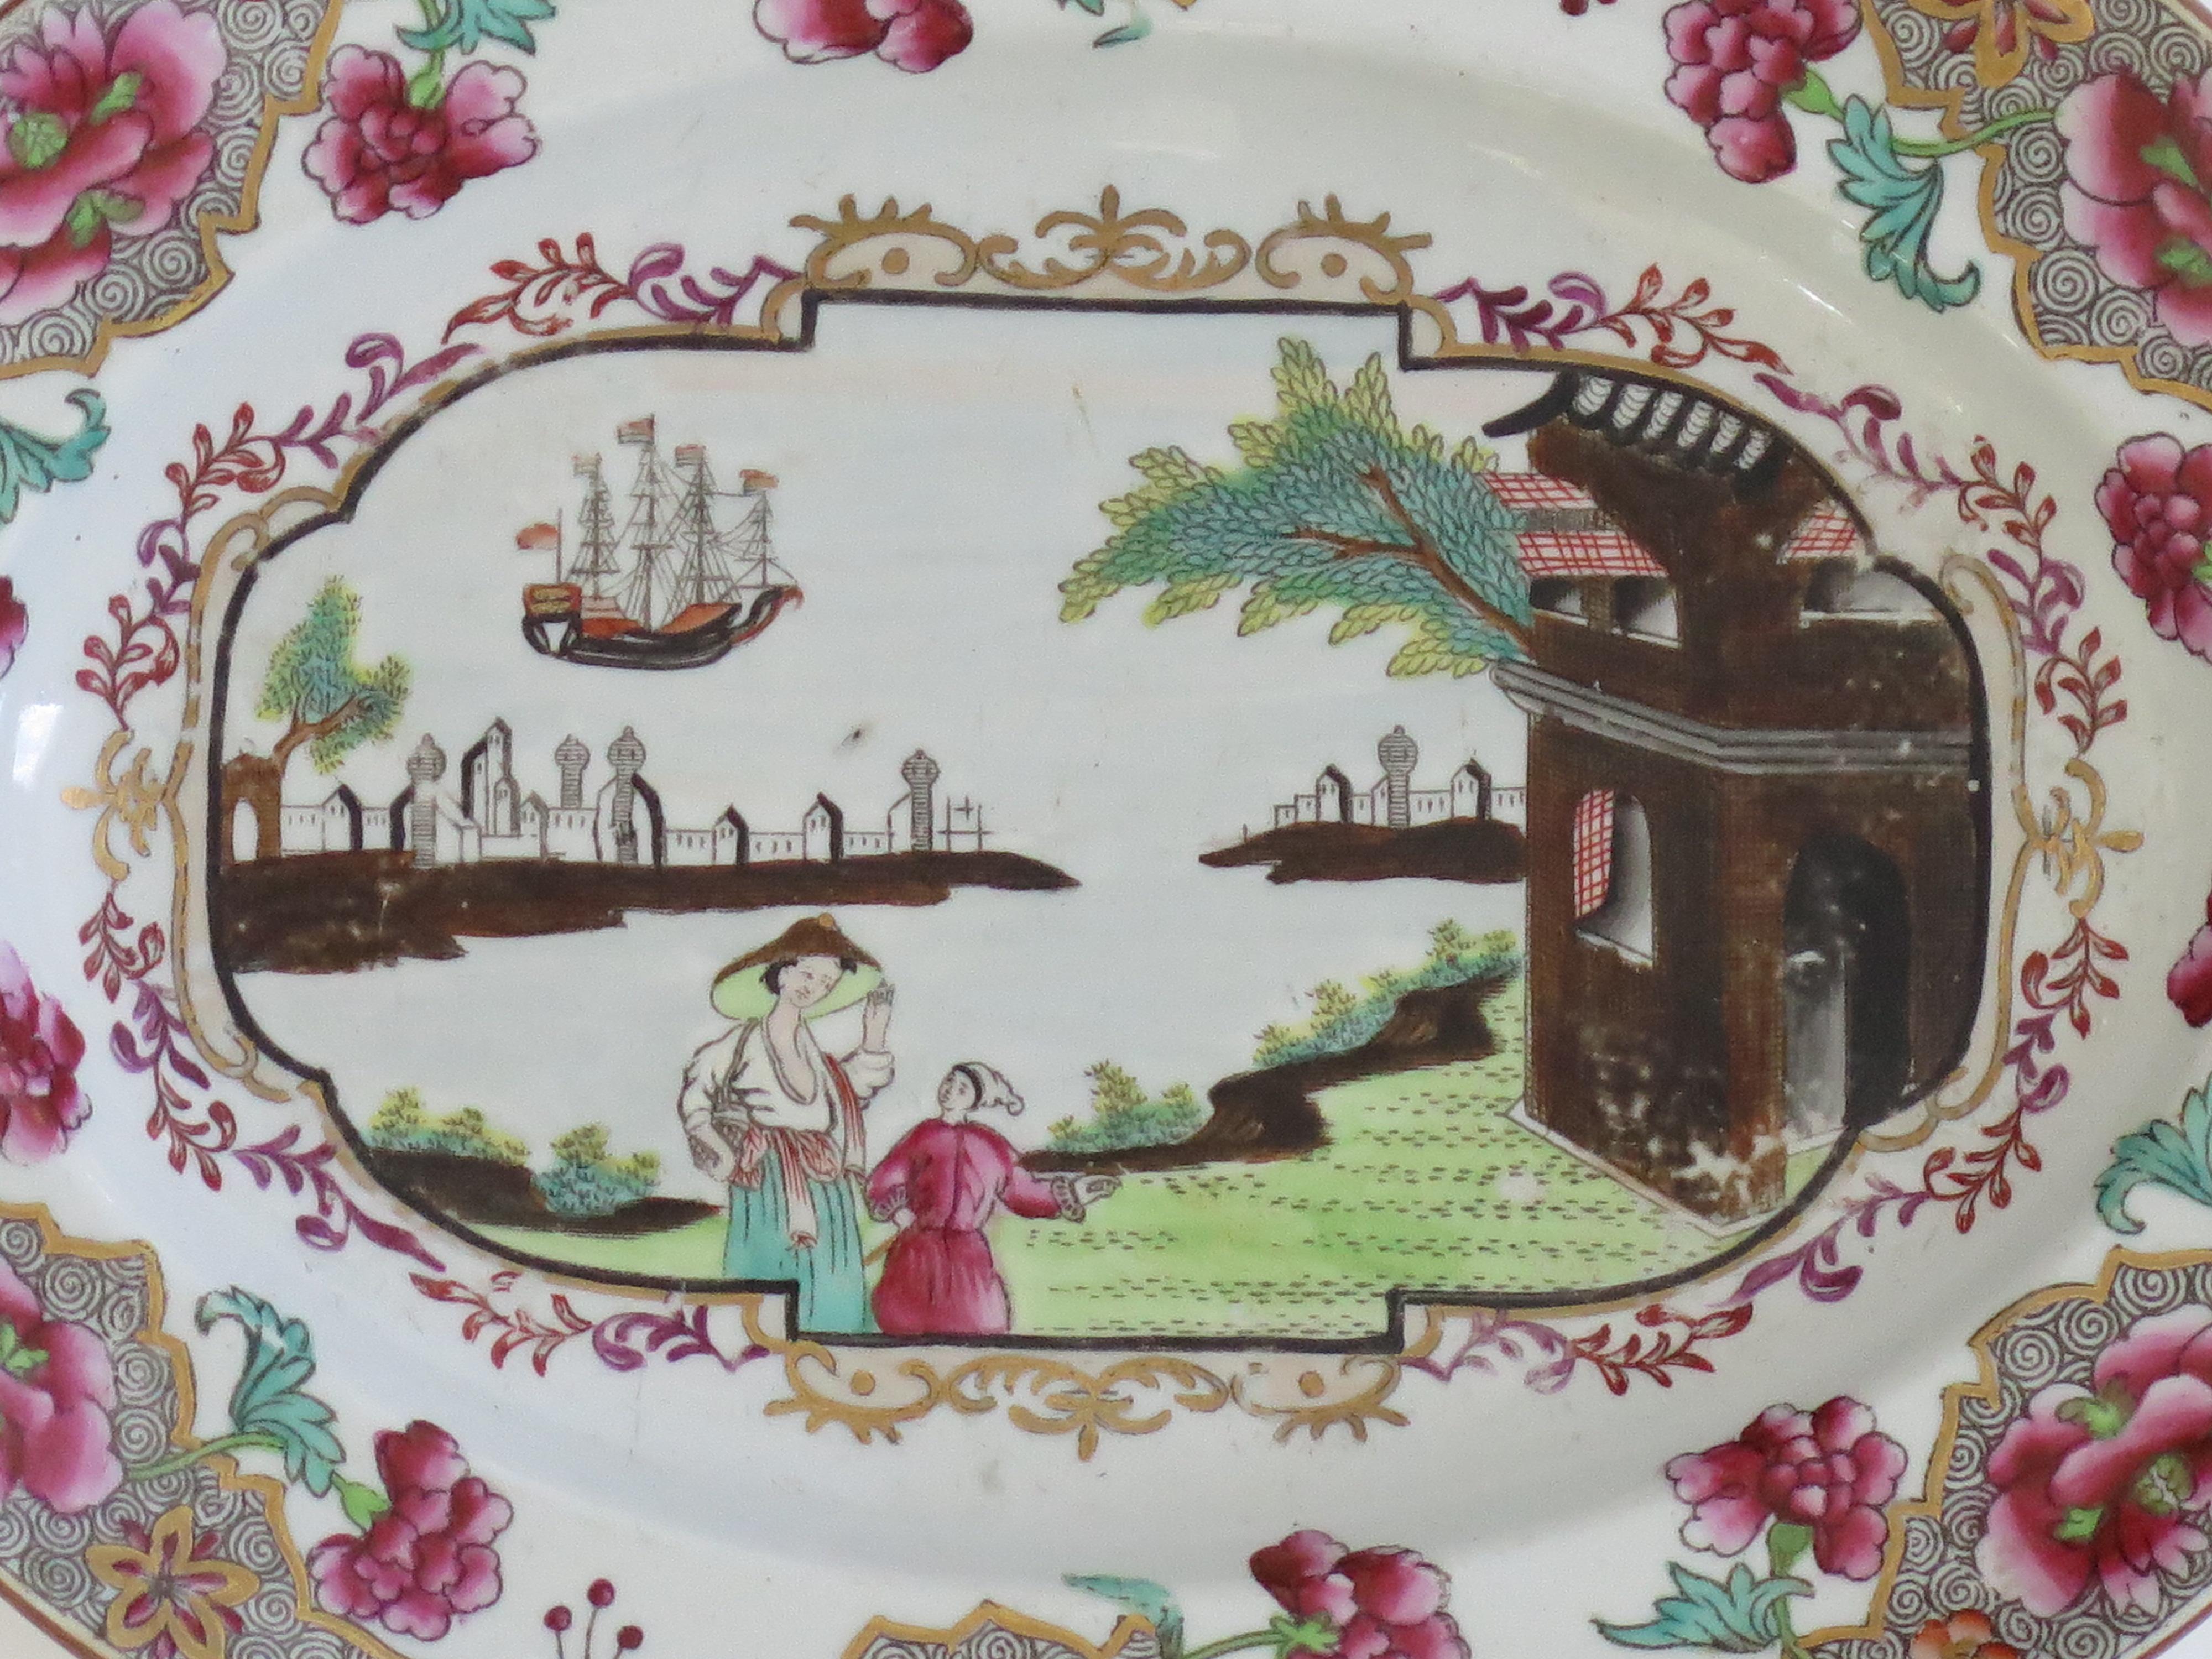 Spode Stone China Small Serving Dish in Ship Pattern 3068, circa 1810 In Good Condition For Sale In Lincoln, Lincolnshire